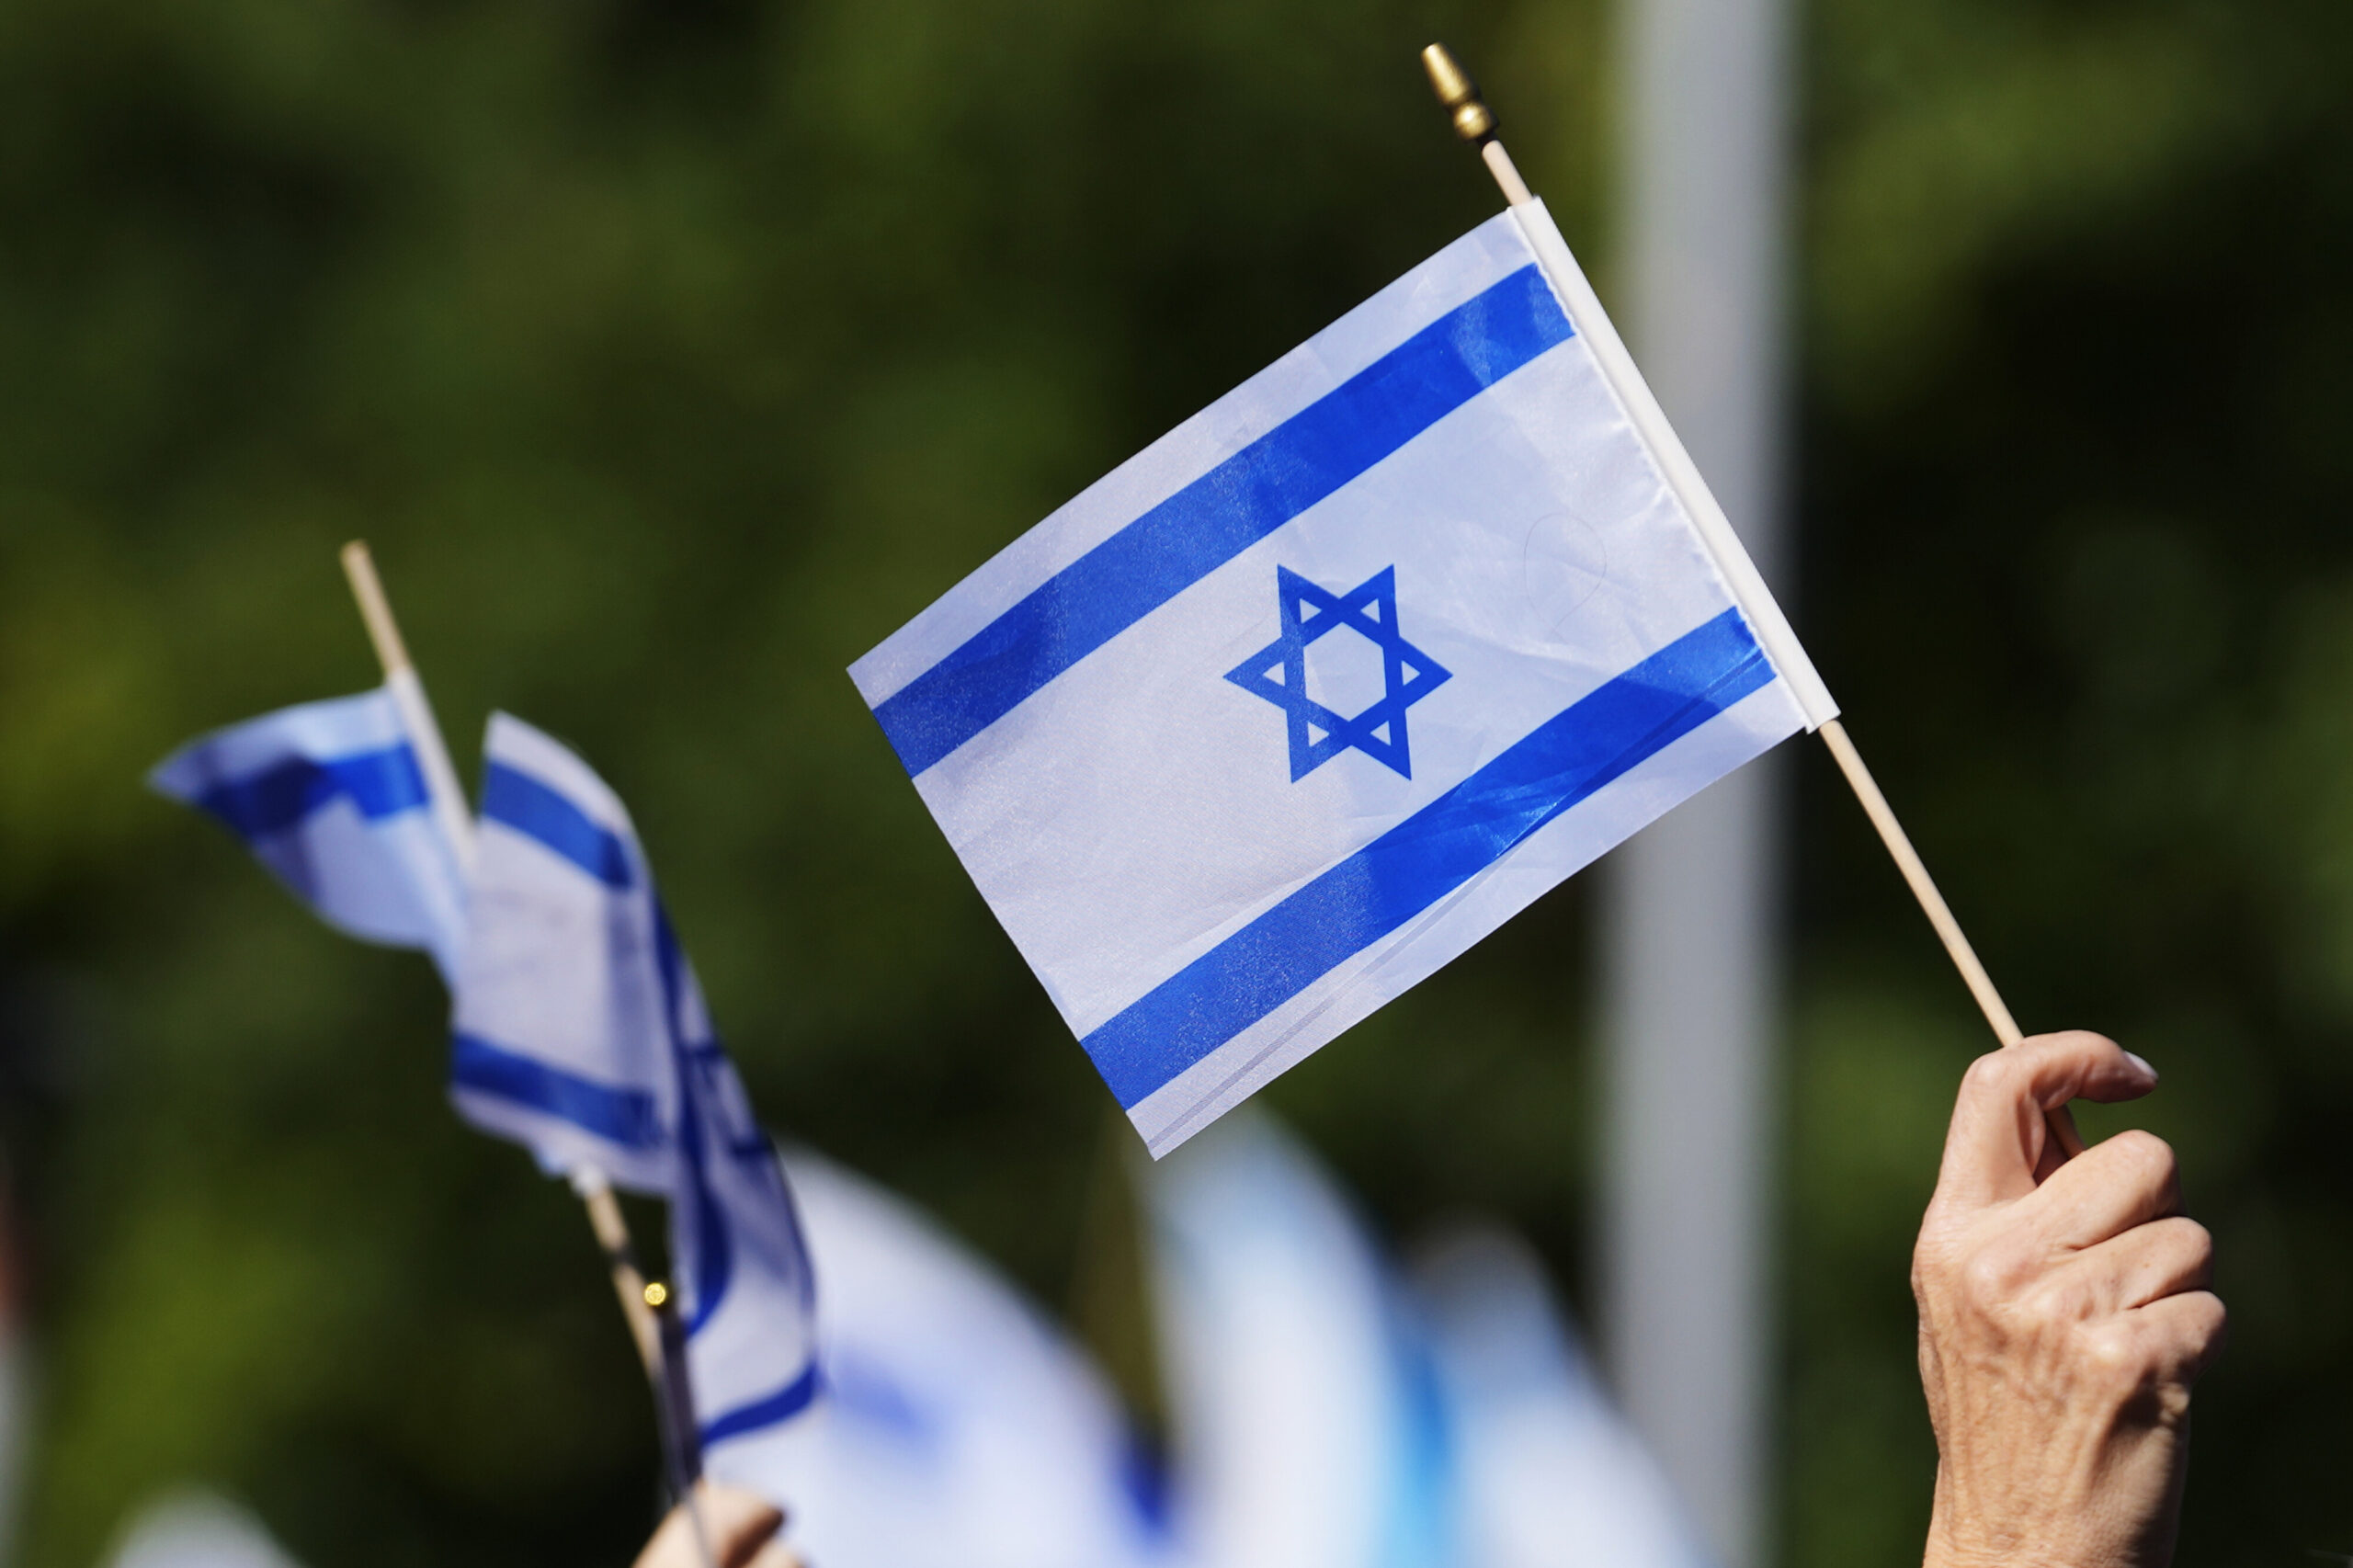 Supporters of Israel hold Israel flags at a Jewish United Fund-hosted solidarity event in Glencoe, Ill.